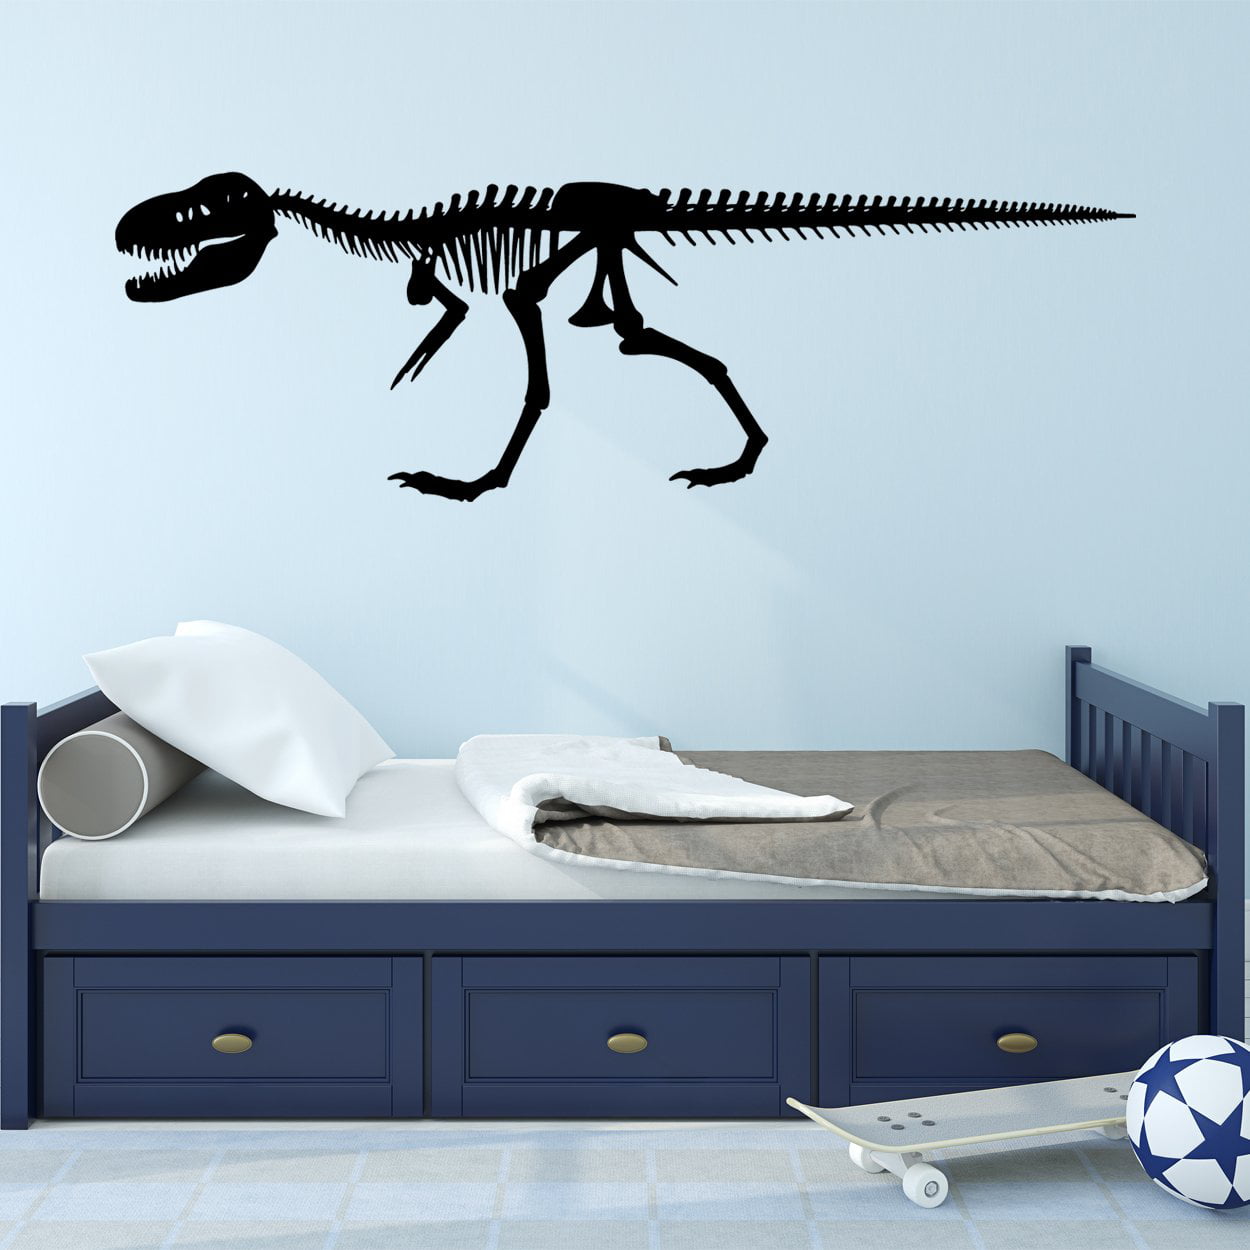 3D Dinosaur hole in the wall LARGE VINYL WALL STICKER DECALS CHILDREN Room 75 